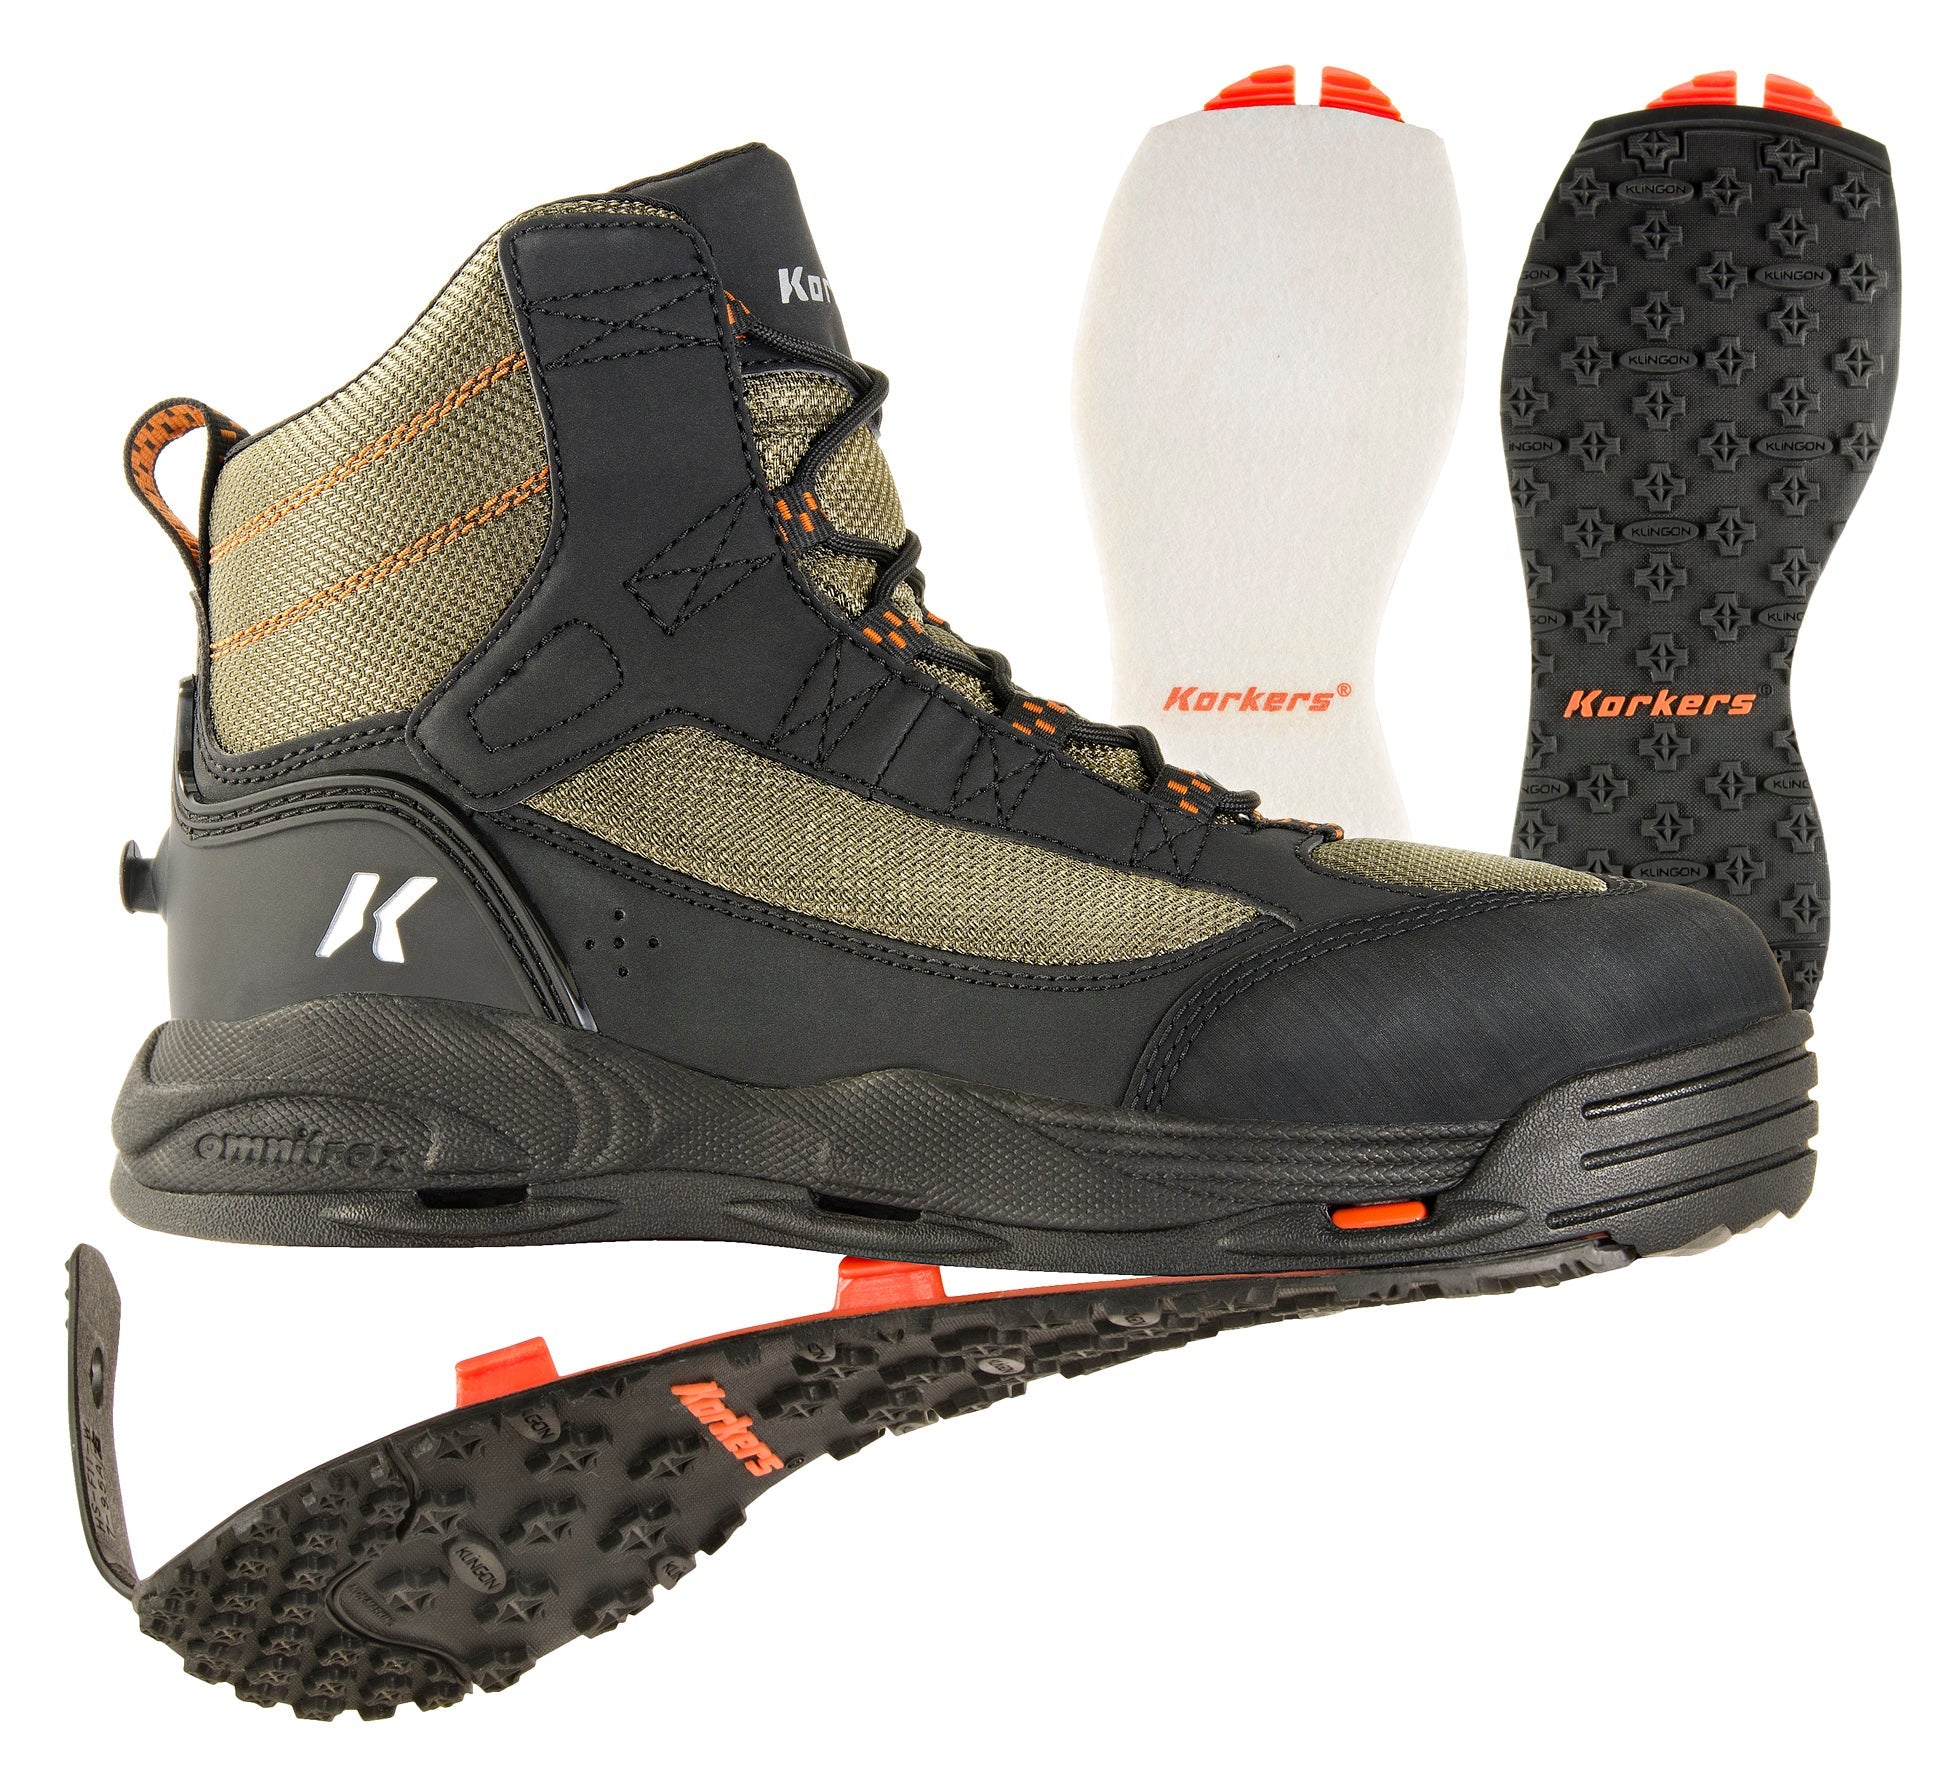 Korkers River OPS Wading Boots with Felt and Vibram Soles Size 10